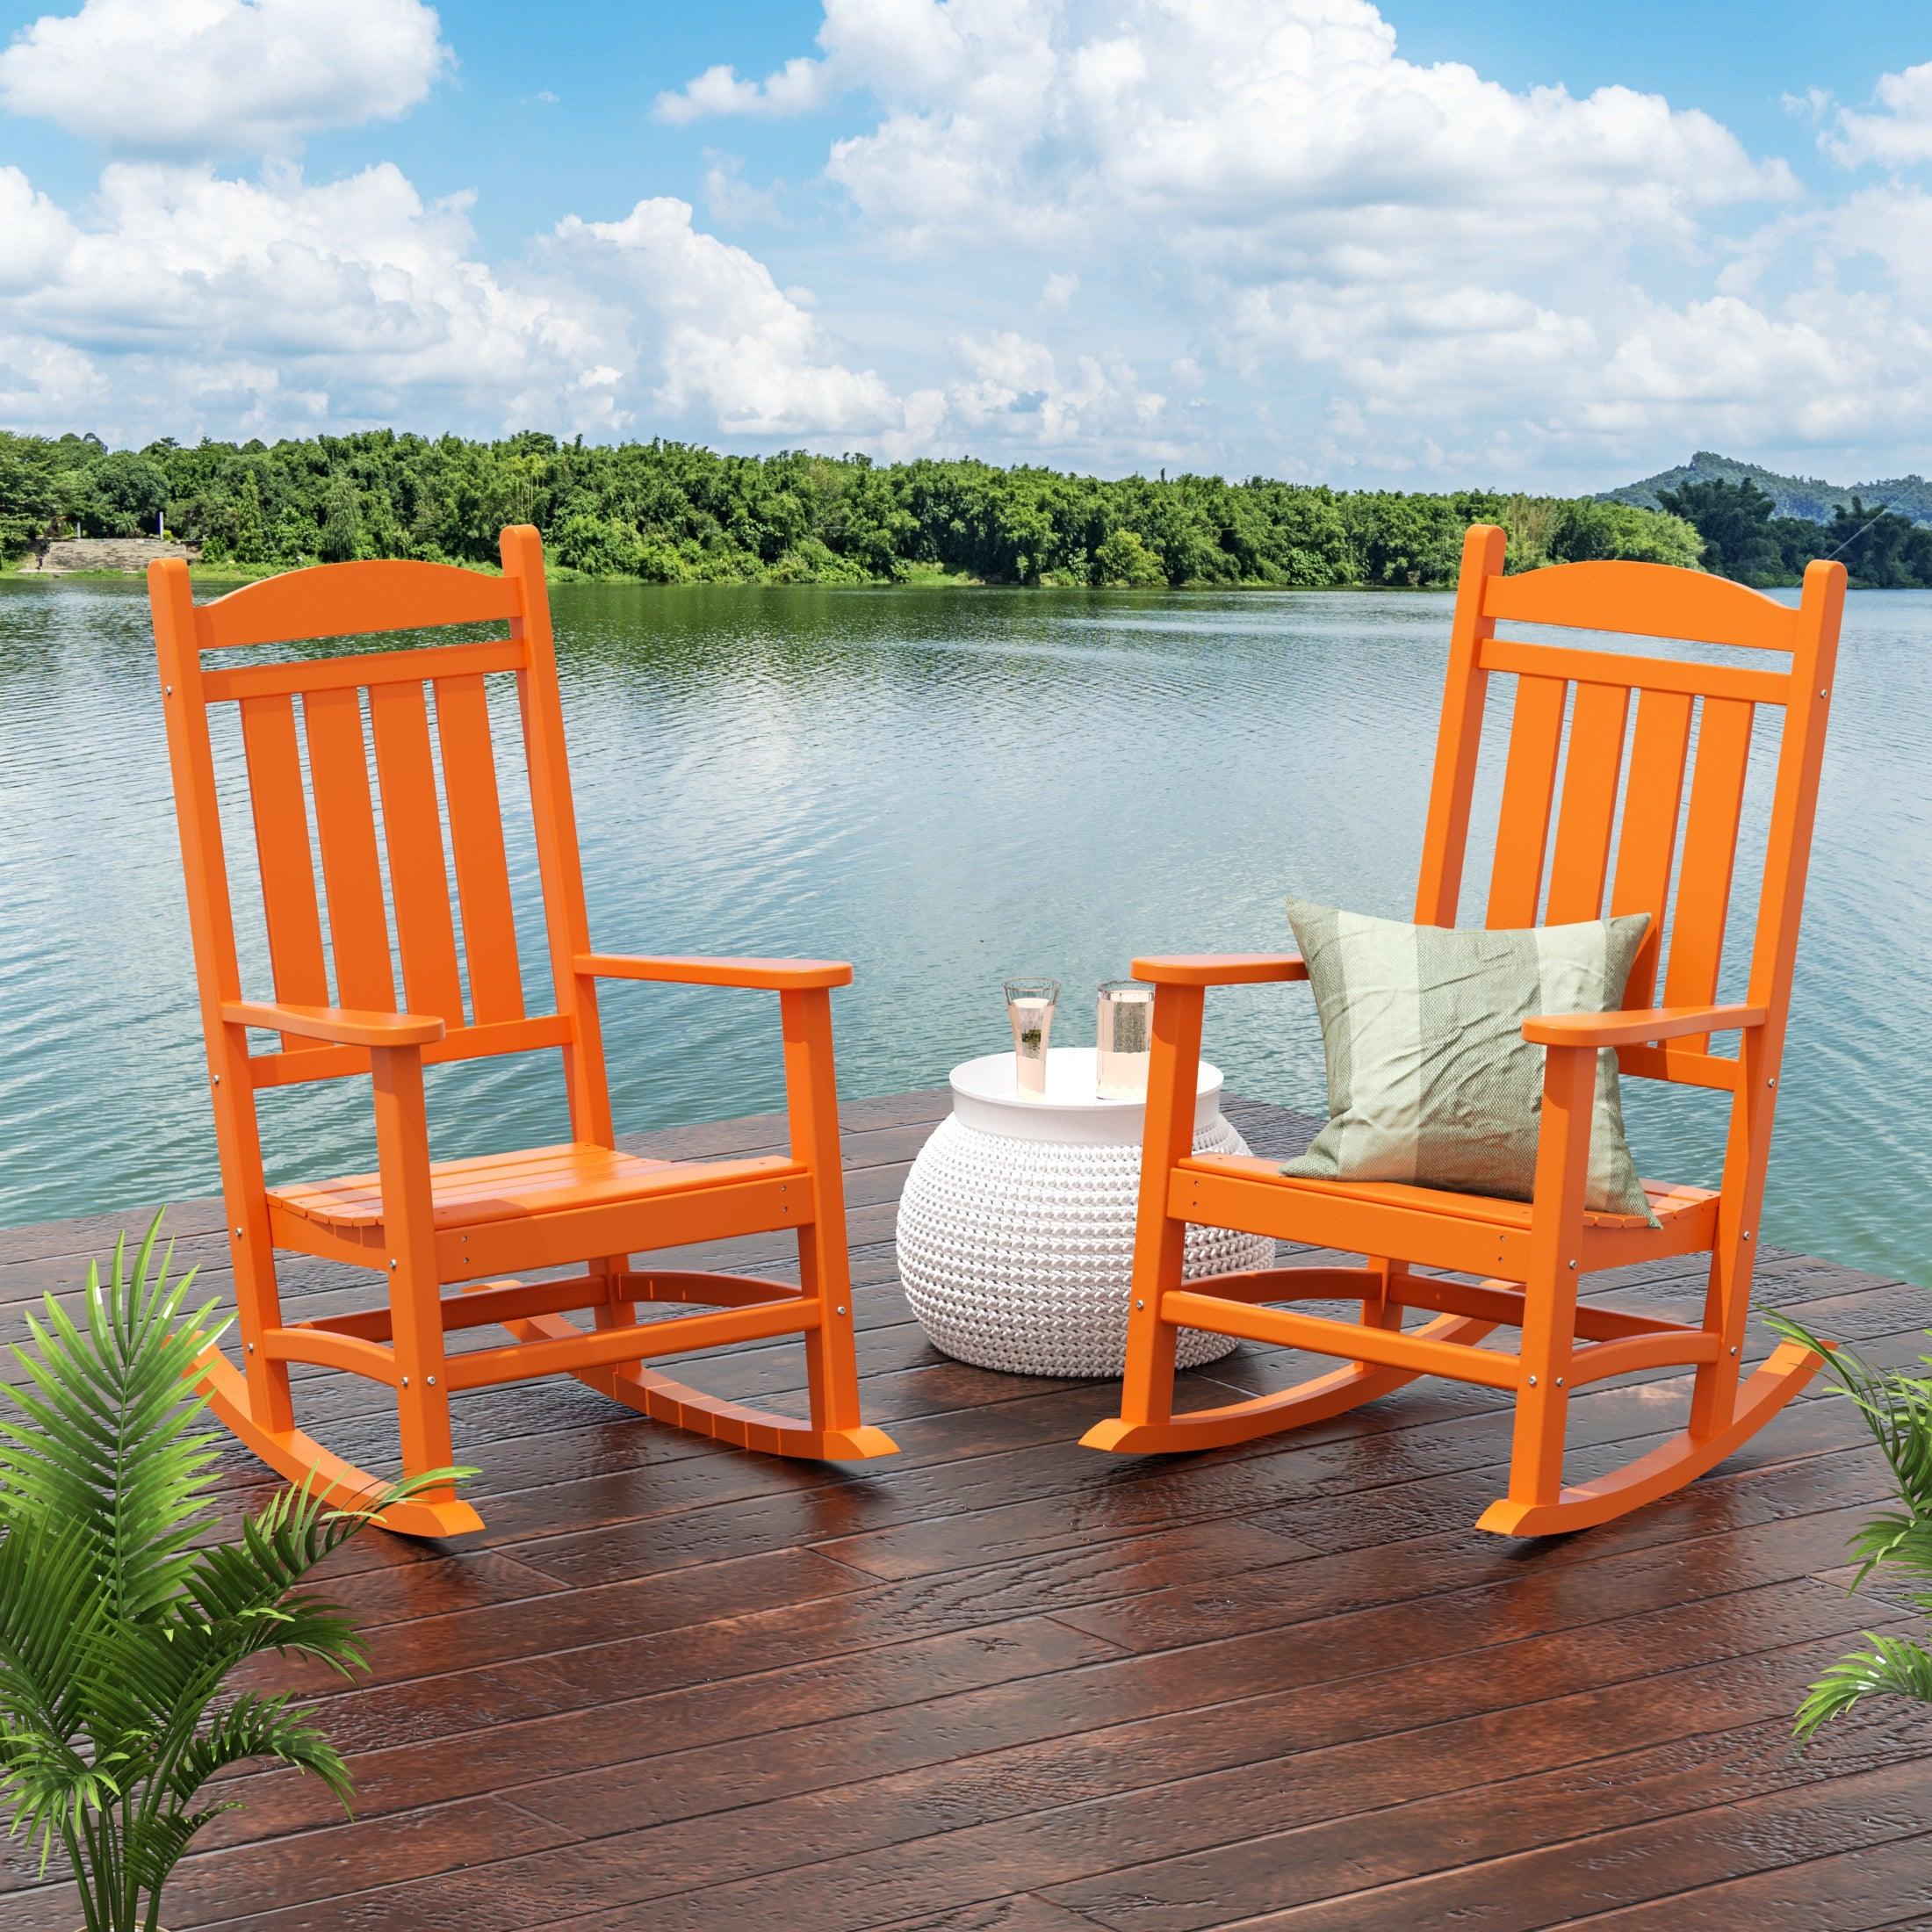 Lakehouse Classic Plastic Outdoor Porch Rocking Chairs (Set of 2) - Costaelm